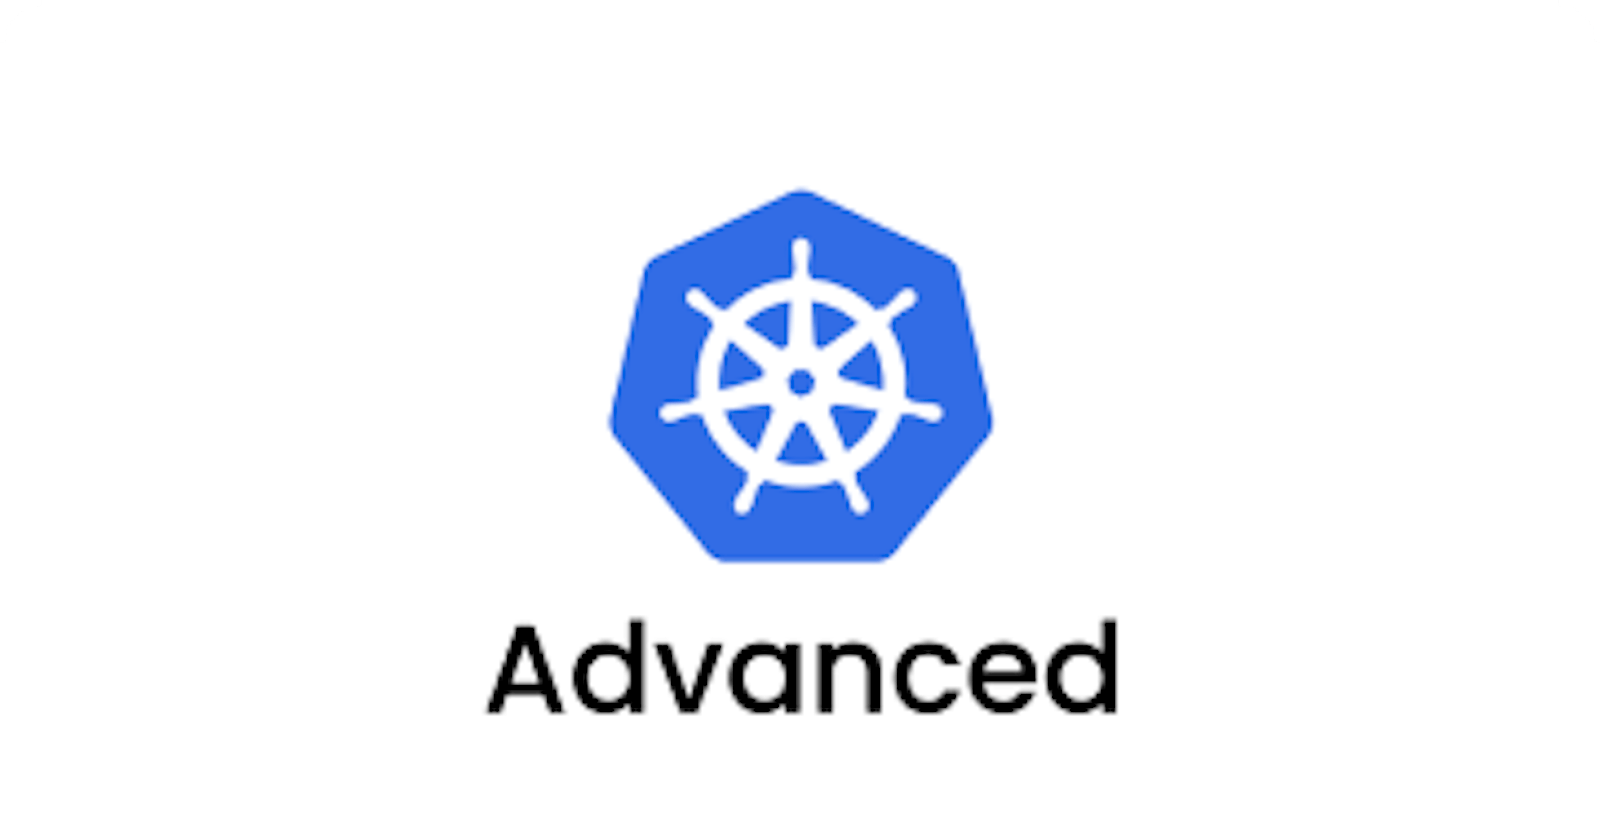 The Next Frontier: Advancing Your Kubernetes Knowledge